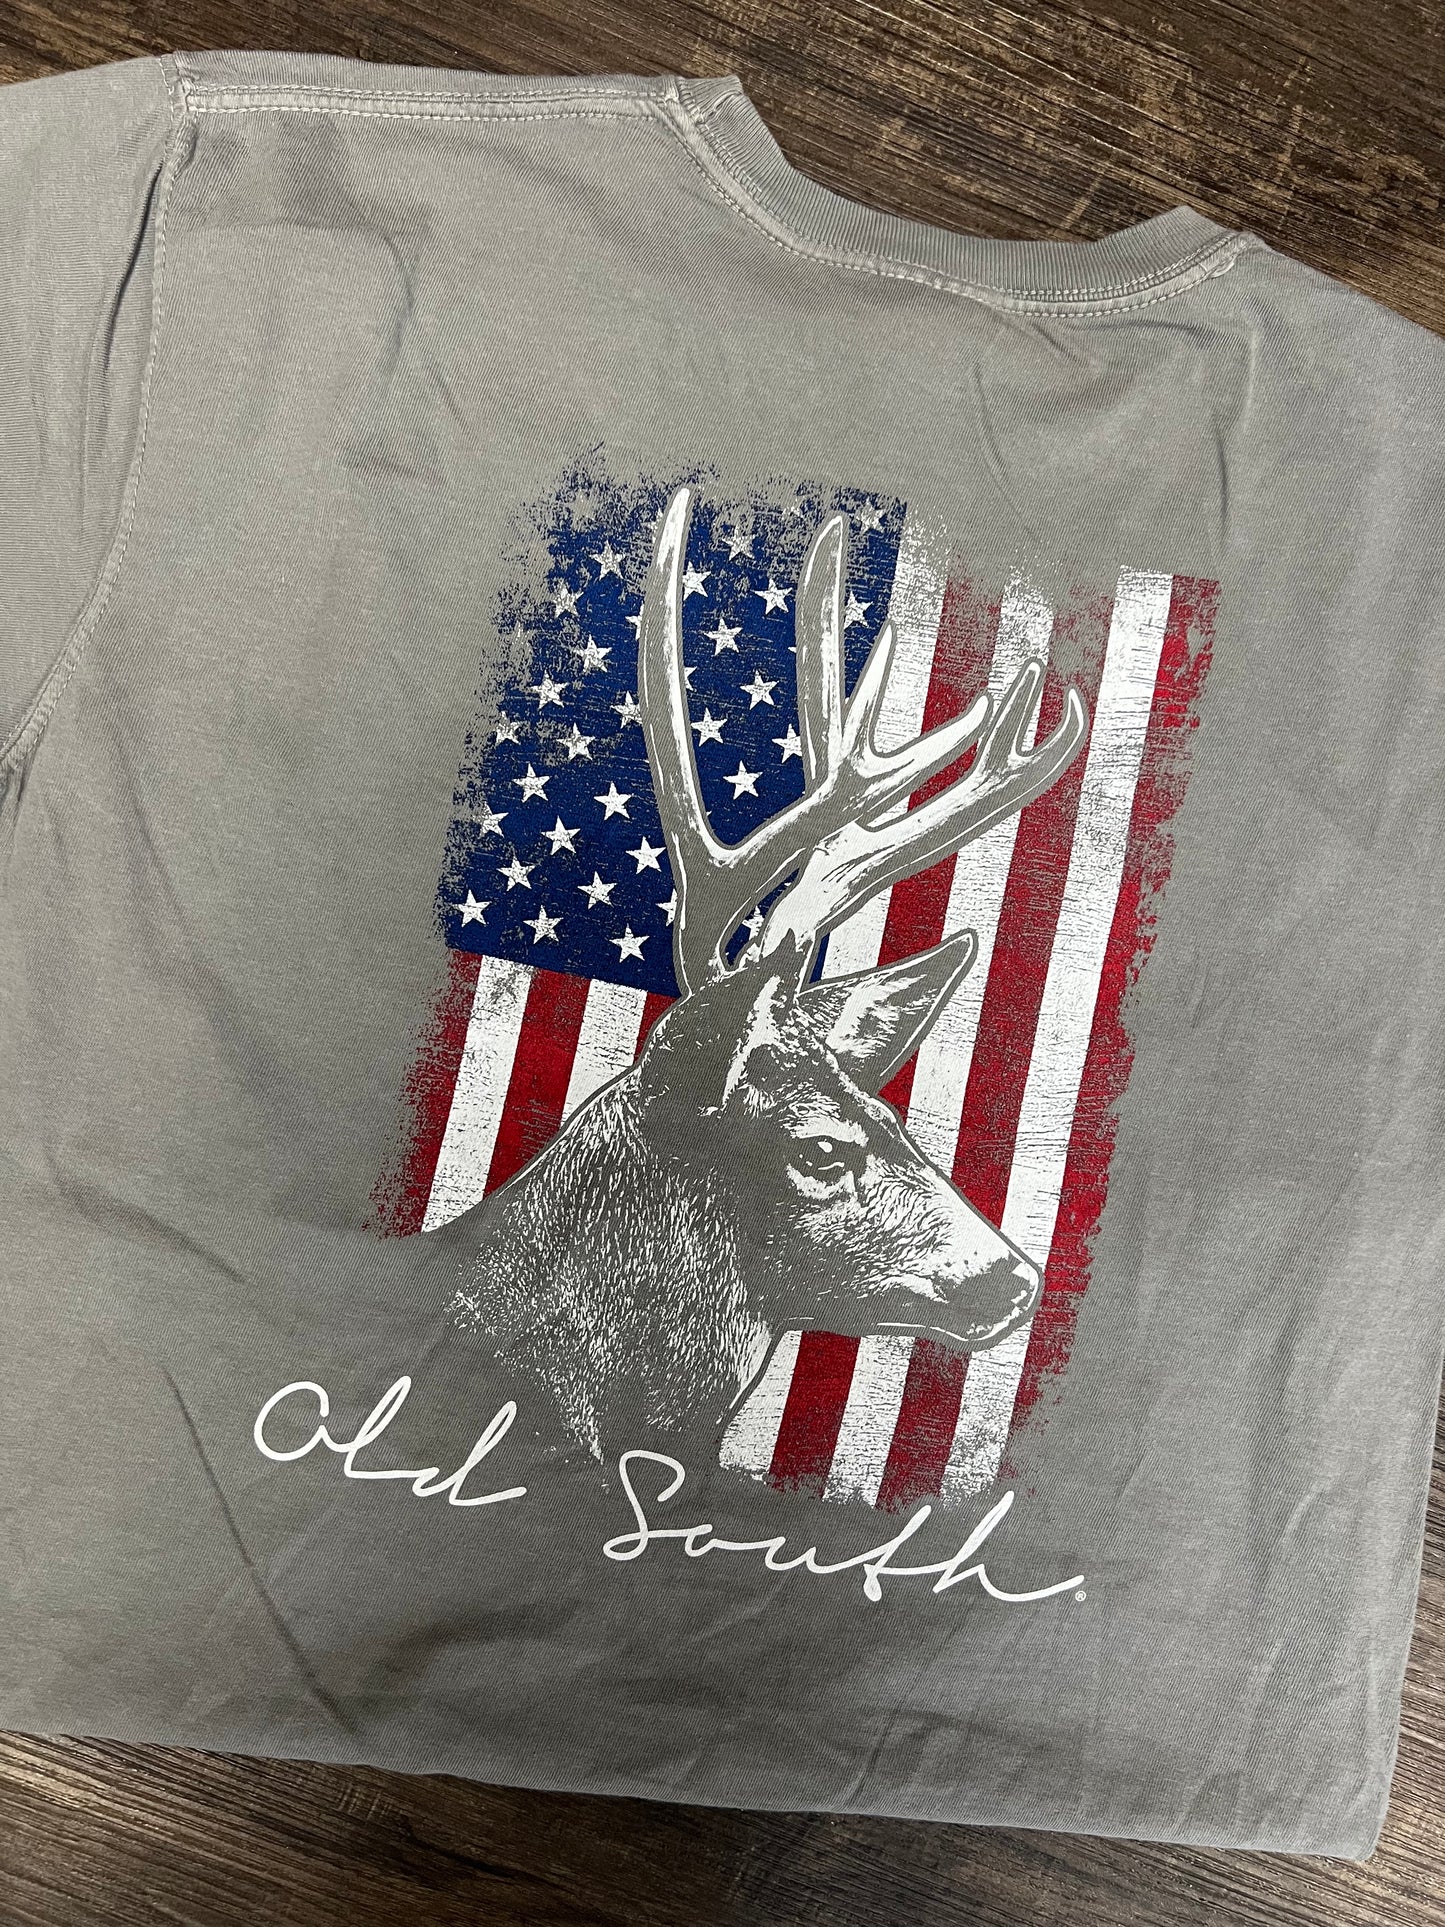 Deerly Old South Tee